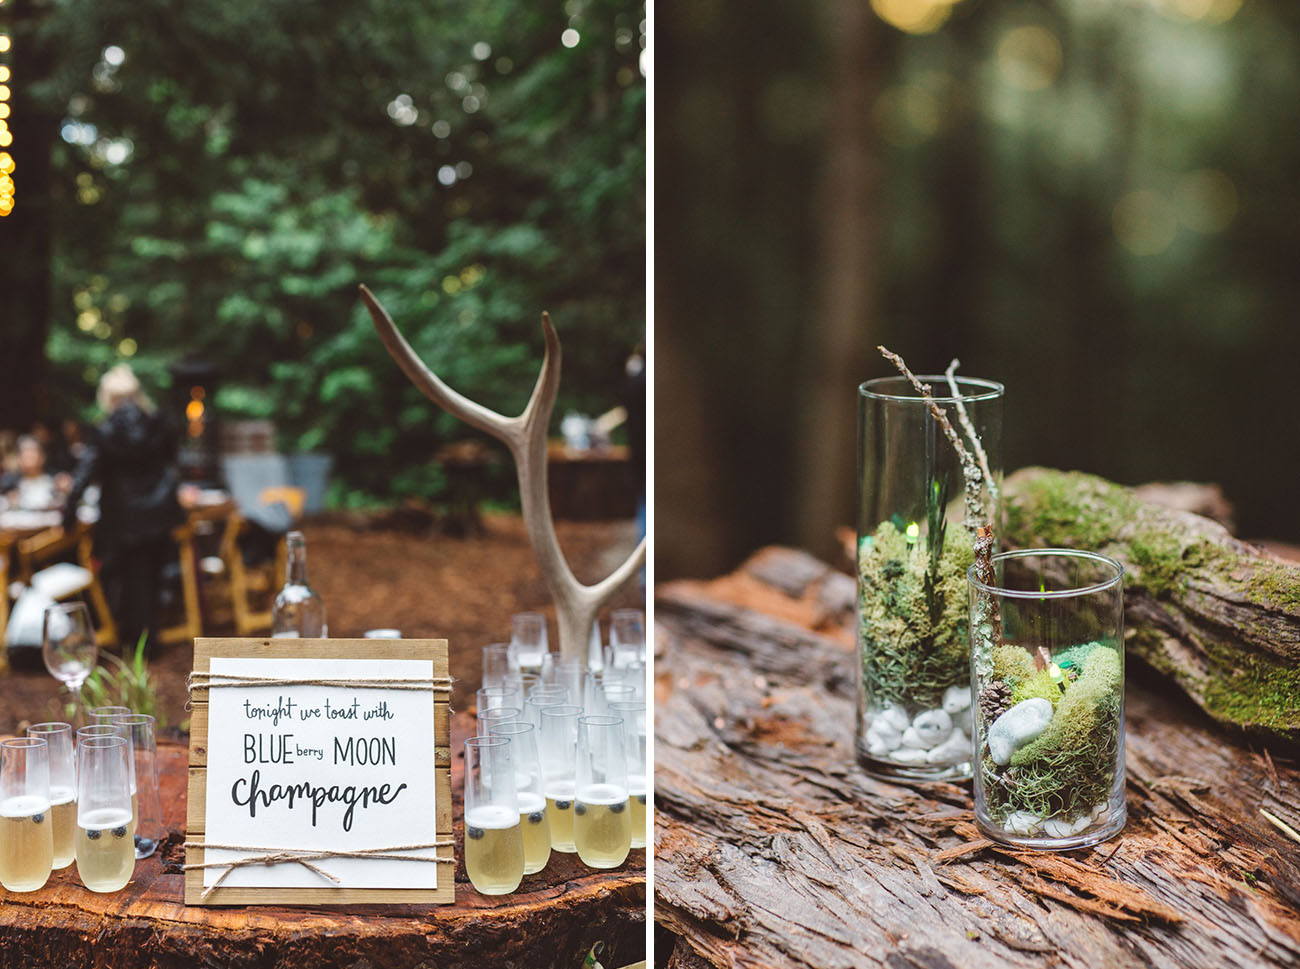 Antlers and moss were used for wedding decor because it was a forest celebration